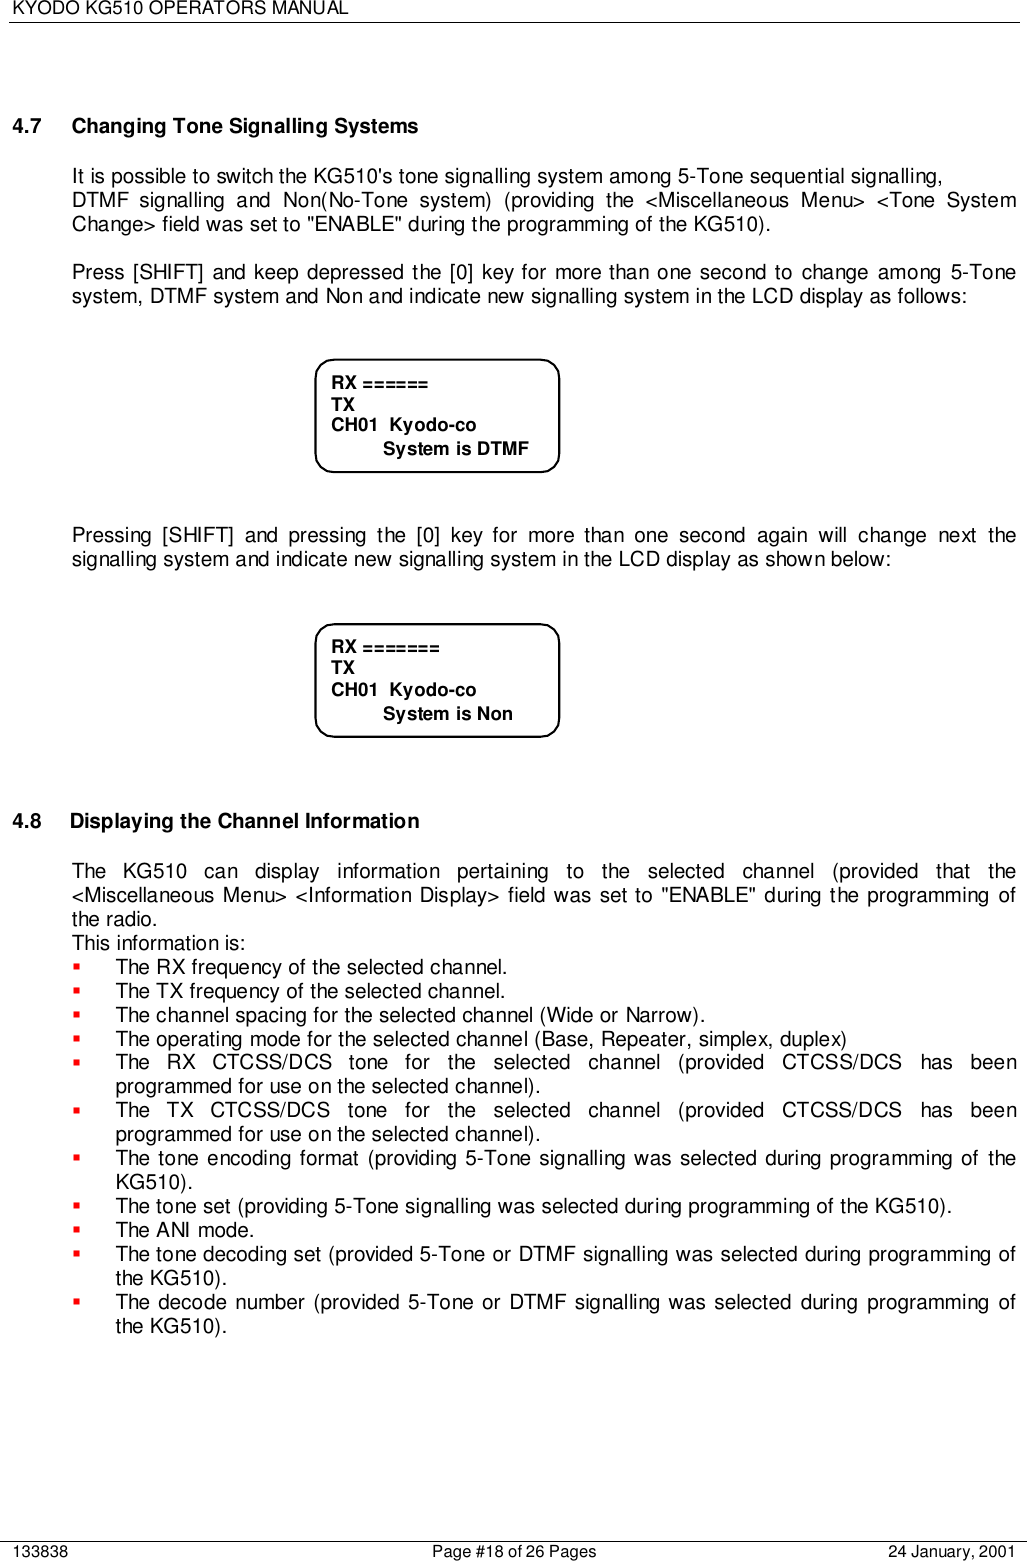 KYODO KG510 OPERATORS MANUAL133838 Page #18 of 26 Pages 24 January, 20014.7 Changing Tone Signalling SystemsIt is possible to switch the KG510&apos;s tone signalling system among 5-Tone sequential signalling,DTMF signalling and Non(No-Tone system) (providing the &lt;Miscellaneous Menu&gt; &lt;Tone SystemChange&gt; field was set to &quot;ENABLE&quot; during the programming of the KG510).Press [SHIFT] and keep depressed the [0] key for more than one second to change among 5-Tonesystem, DTMF system and Non and indicate new signalling system in the LCD display as follows:Pressing [SHIFT] and pressing the [0] key for more than one second again will change next thesignalling system and indicate new signalling system in the LCD display as shown below:4.8  Displaying the Channel InformationThe KG510 can display information pertaining to the selected channel (provided that the&lt;Miscellaneous Menu&gt; &lt;Information Display&gt; field was set to &quot;ENABLE&quot; during the programming ofthe radio.This information is:! The RX frequency of the selected channel.! The TX frequency of the selected channel.! The channel spacing for the selected channel (Wide or Narrow).! The operating mode for the selected channel (Base, Repeater, simplex, duplex)! The RX CTCSS/DCS tone for the selected channel (provided CTCSS/DCS has beenprogrammed for use on the selected channel).! The TX CTCSS/DCS tone for the selected channel (provided CTCSS/DCS has beenprogrammed for use on the selected channel).! The tone encoding format (providing 5-Tone signalling was selected during programming of theKG510).! The tone set (providing 5-Tone signalling was selected during programming of the KG510).! The ANI mode.! The tone decoding set (provided 5-Tone or DTMF signalling was selected during programming ofthe KG510).! The decode number (provided 5-Tone or DTMF signalling was selected during programming ofthe KG510).RX =======TXCH01  Kyodo-co          System is NonRX ======TXCH01  Kyodo-co          System is DTMF